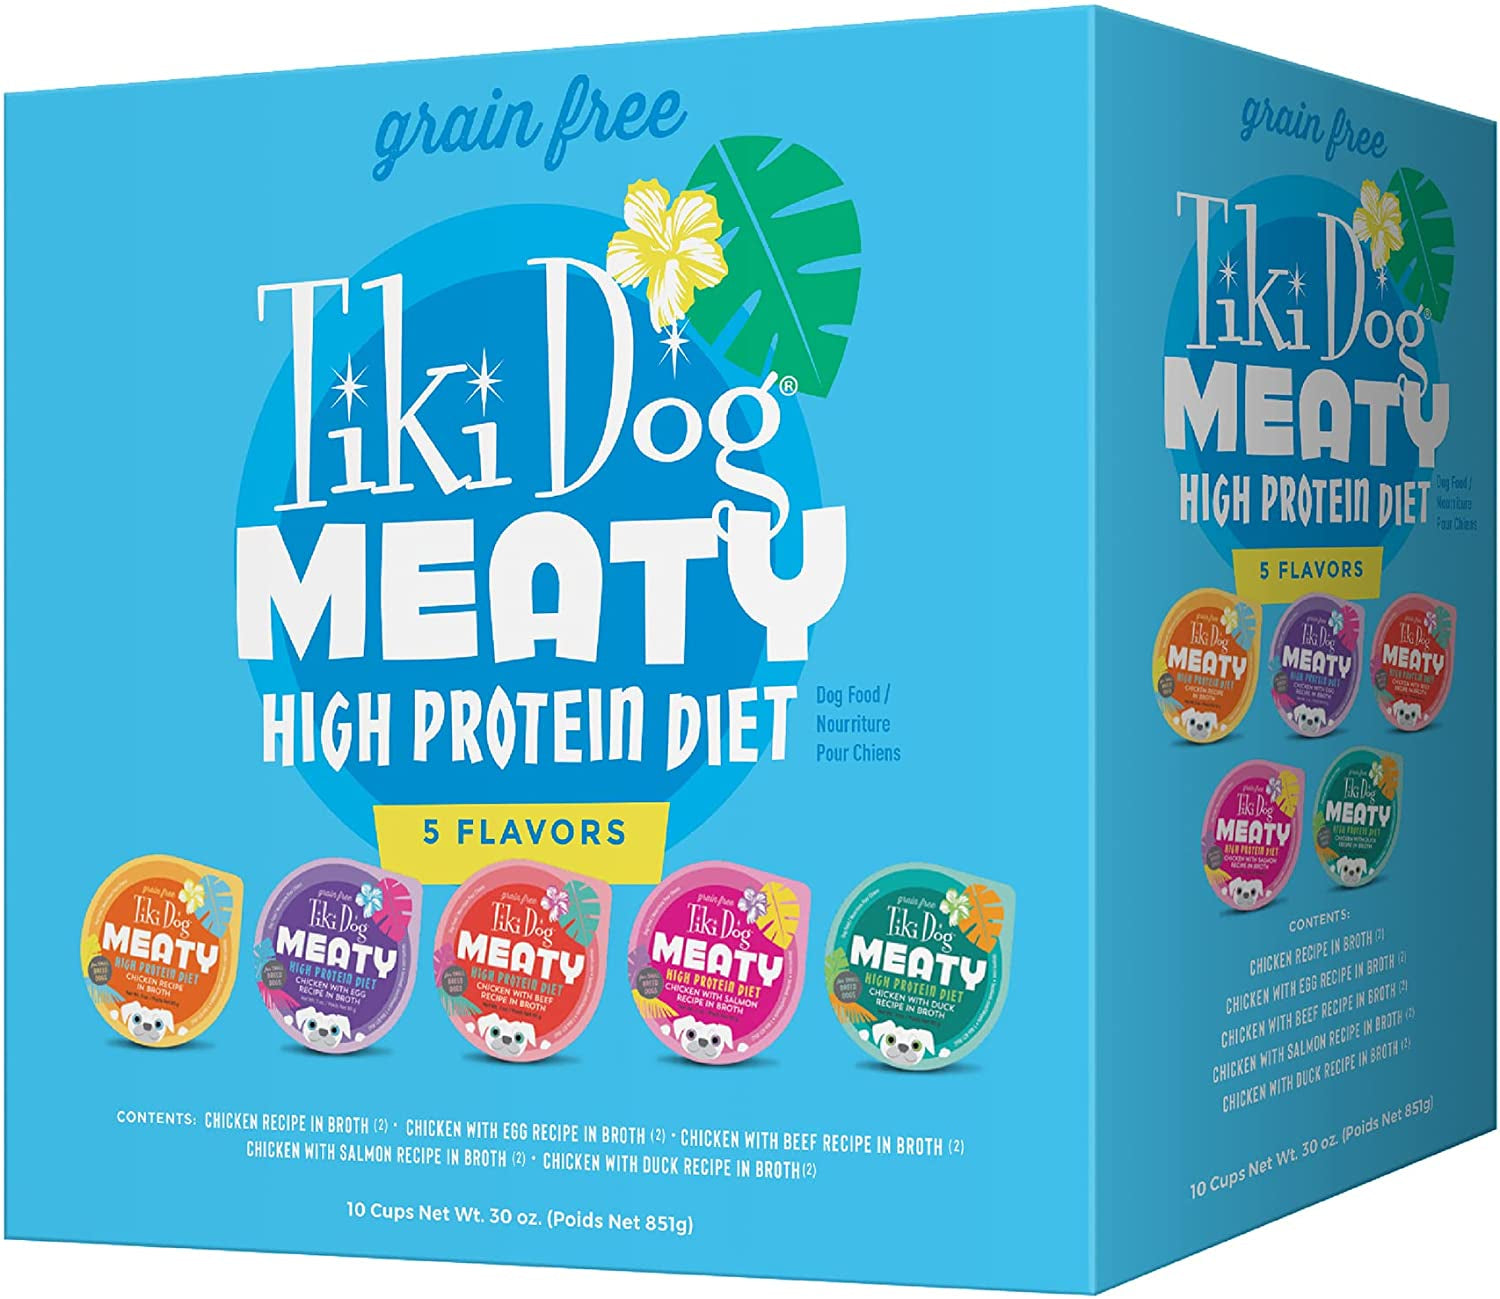 Tiki Dog Meaty Grain Free High Protein Wet Dog Food Variety Pack in Broth, 10 Cans, 3 Oz. (Packaging May Vary)